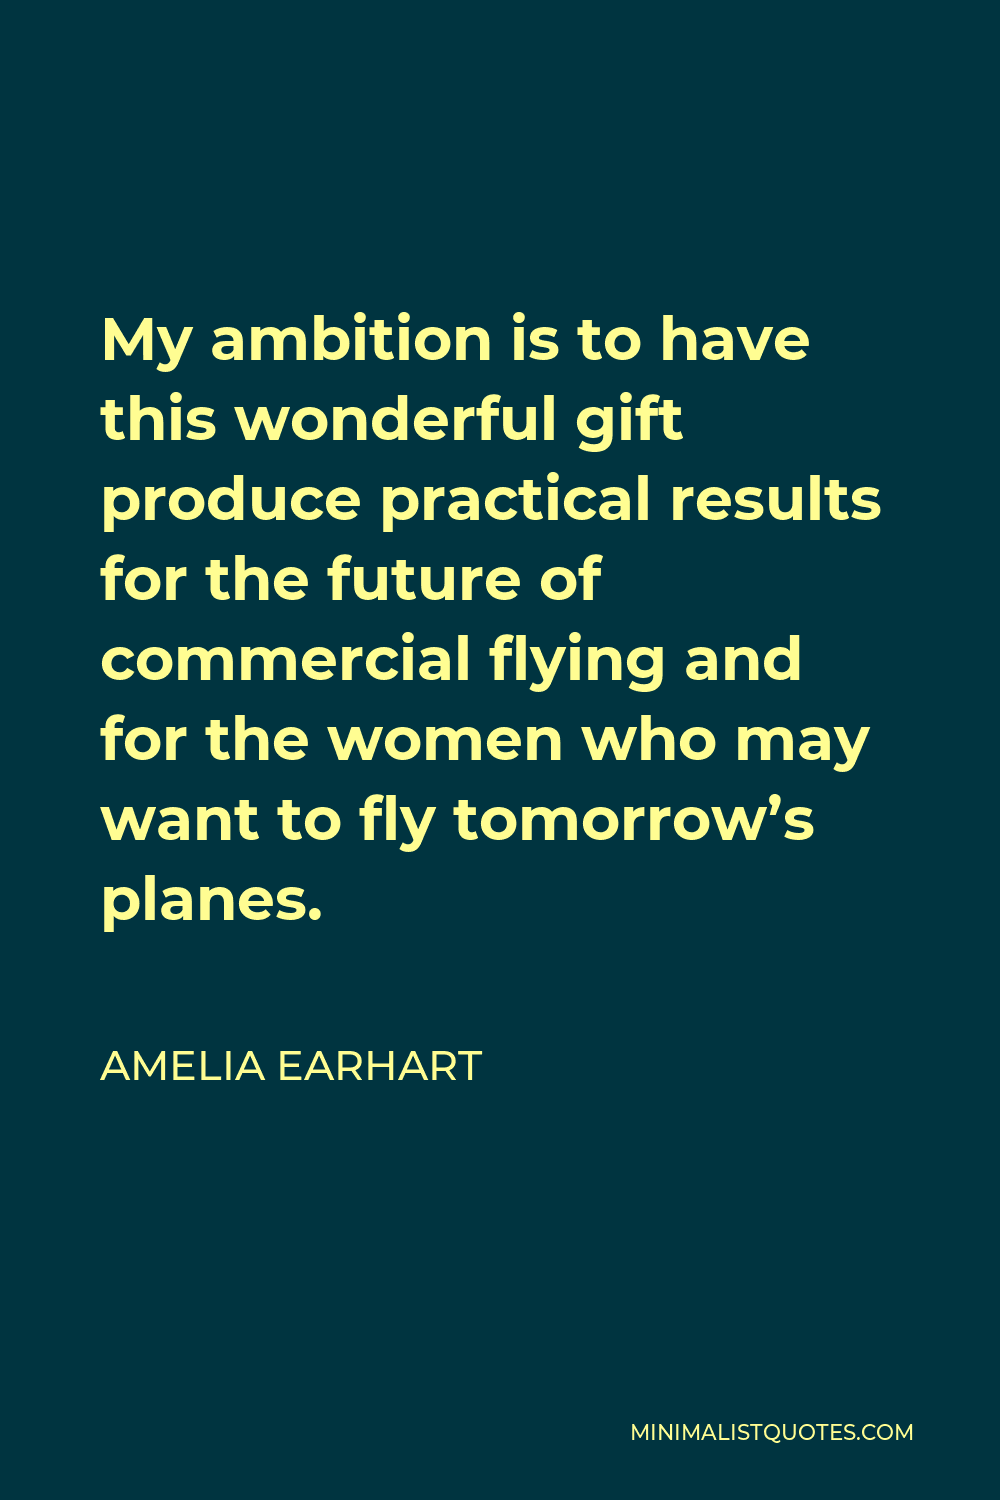 Amelia Earhart Quote: My ambition is to have this wonderful gift produce  practical results for the future of commercial flying and for the women who  may want to fly tomorrow's planes.